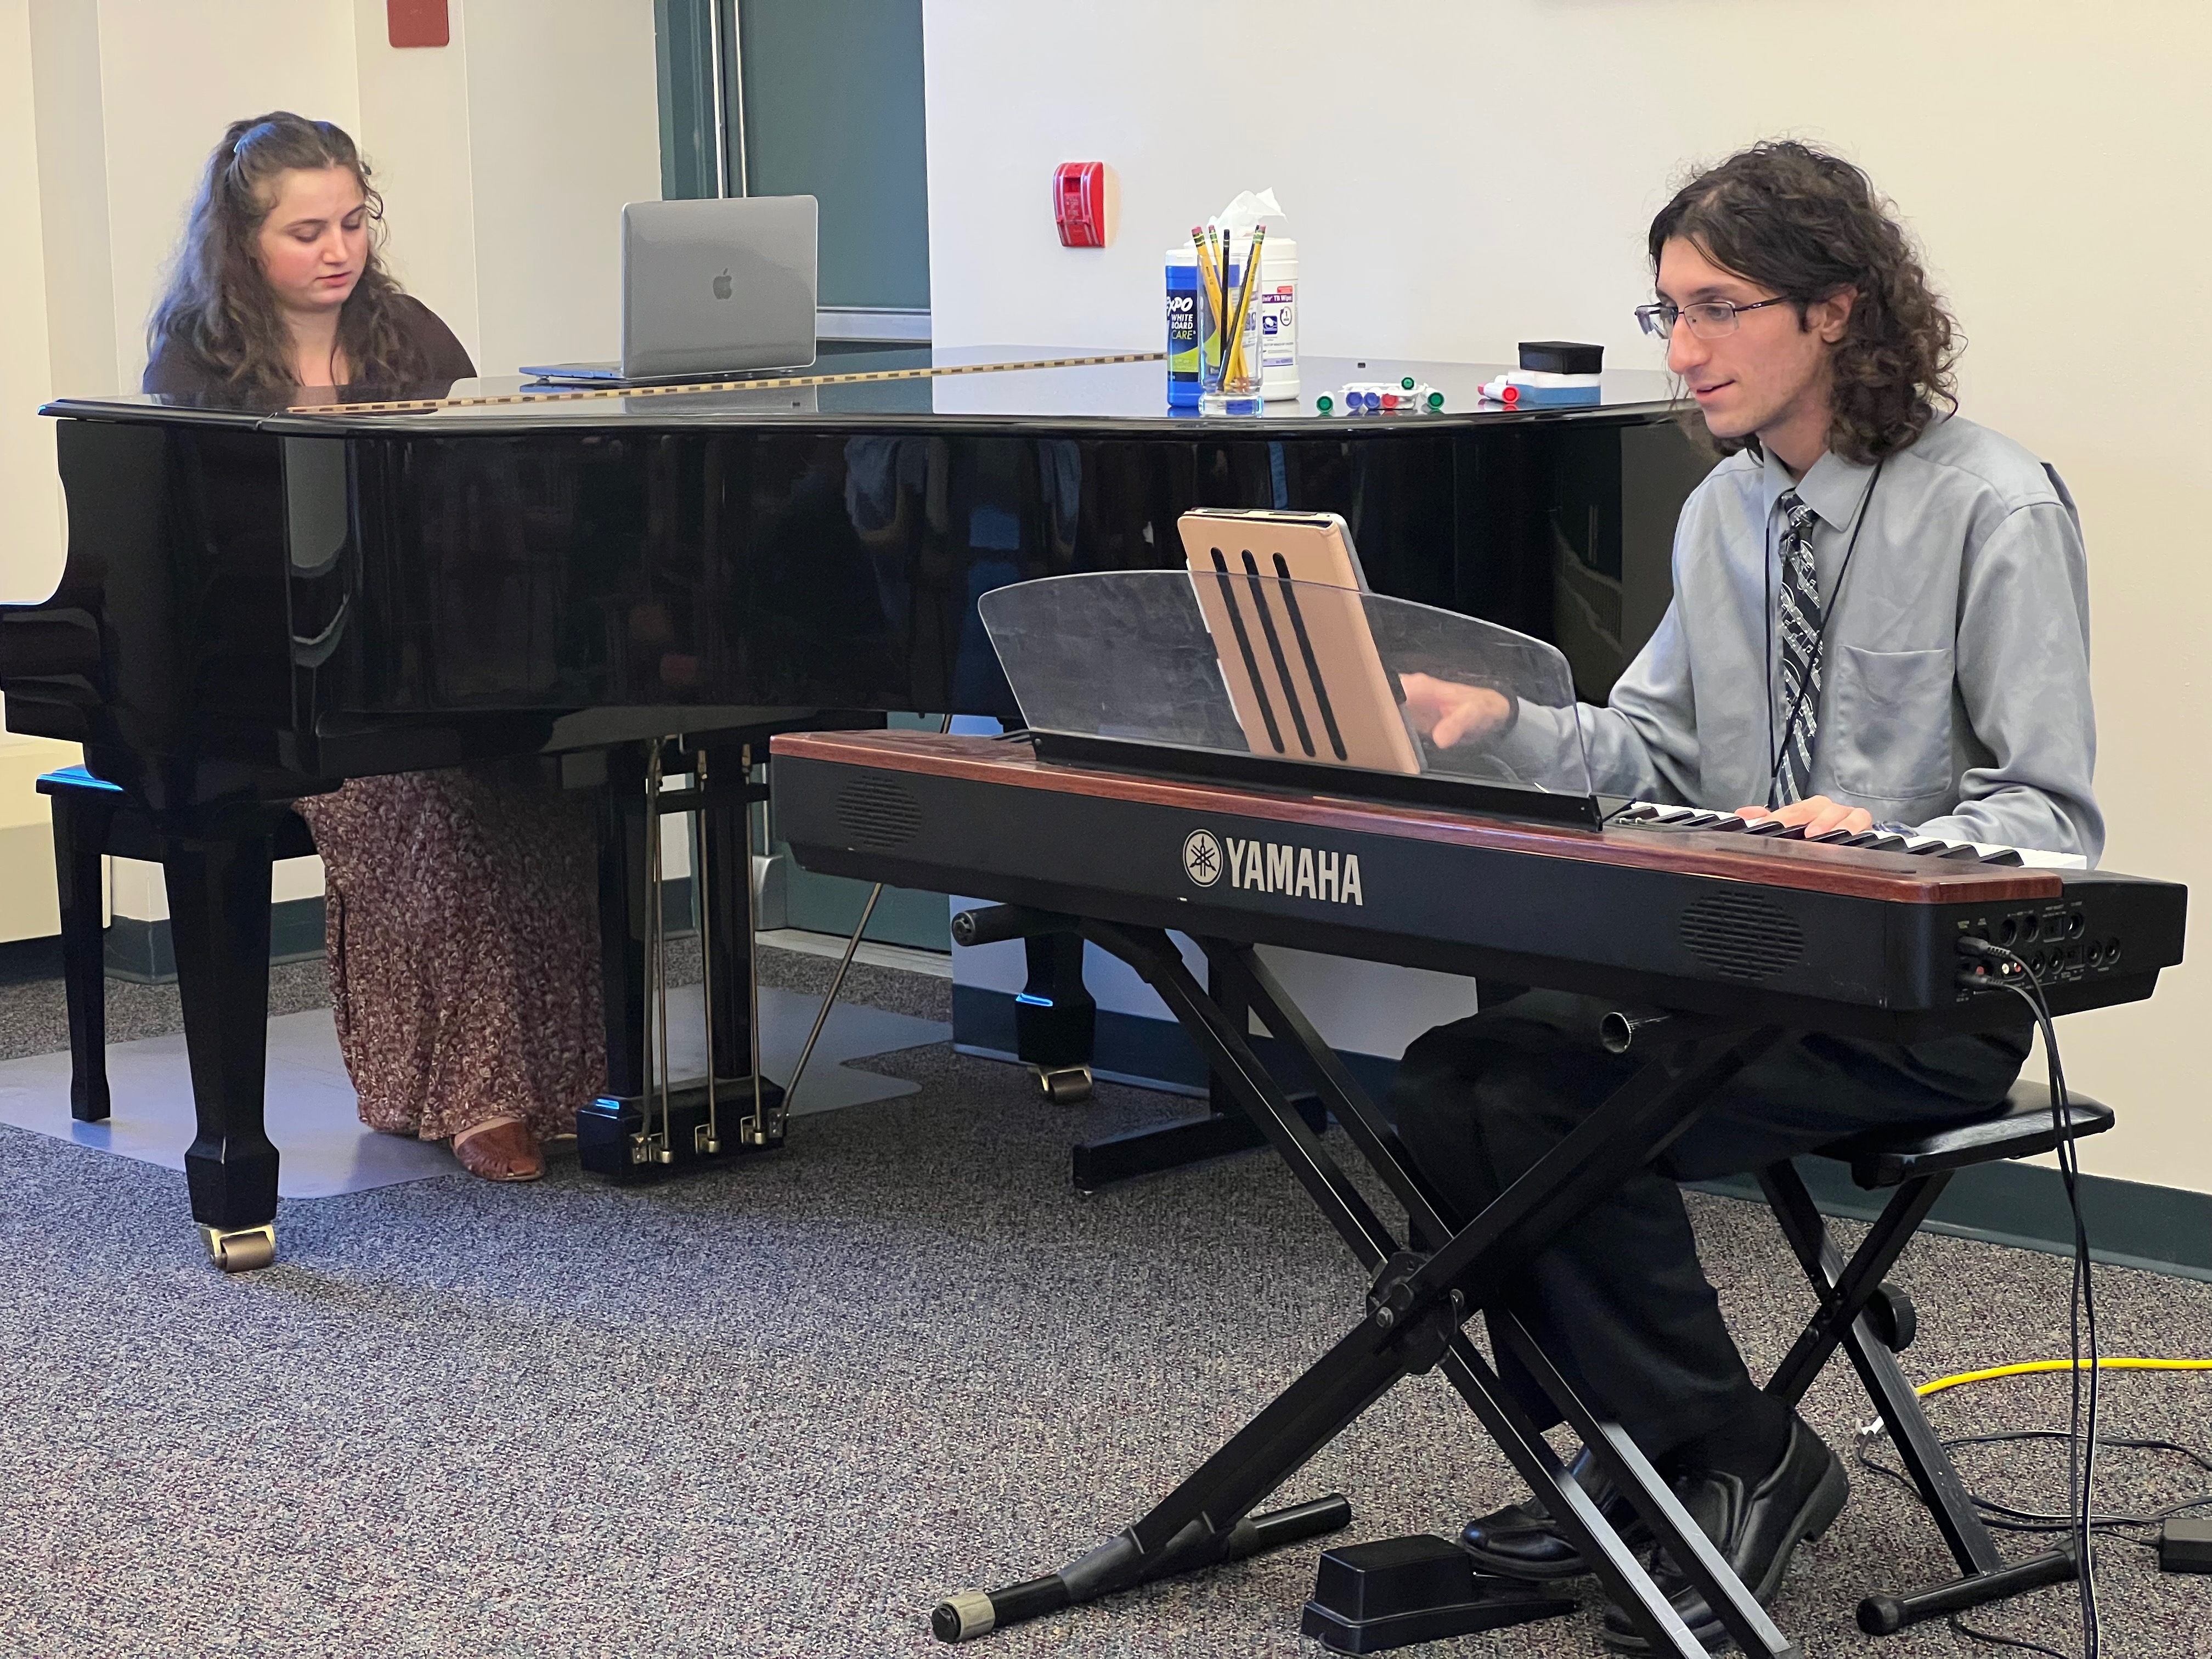 Scenes from the Summer Music Institute